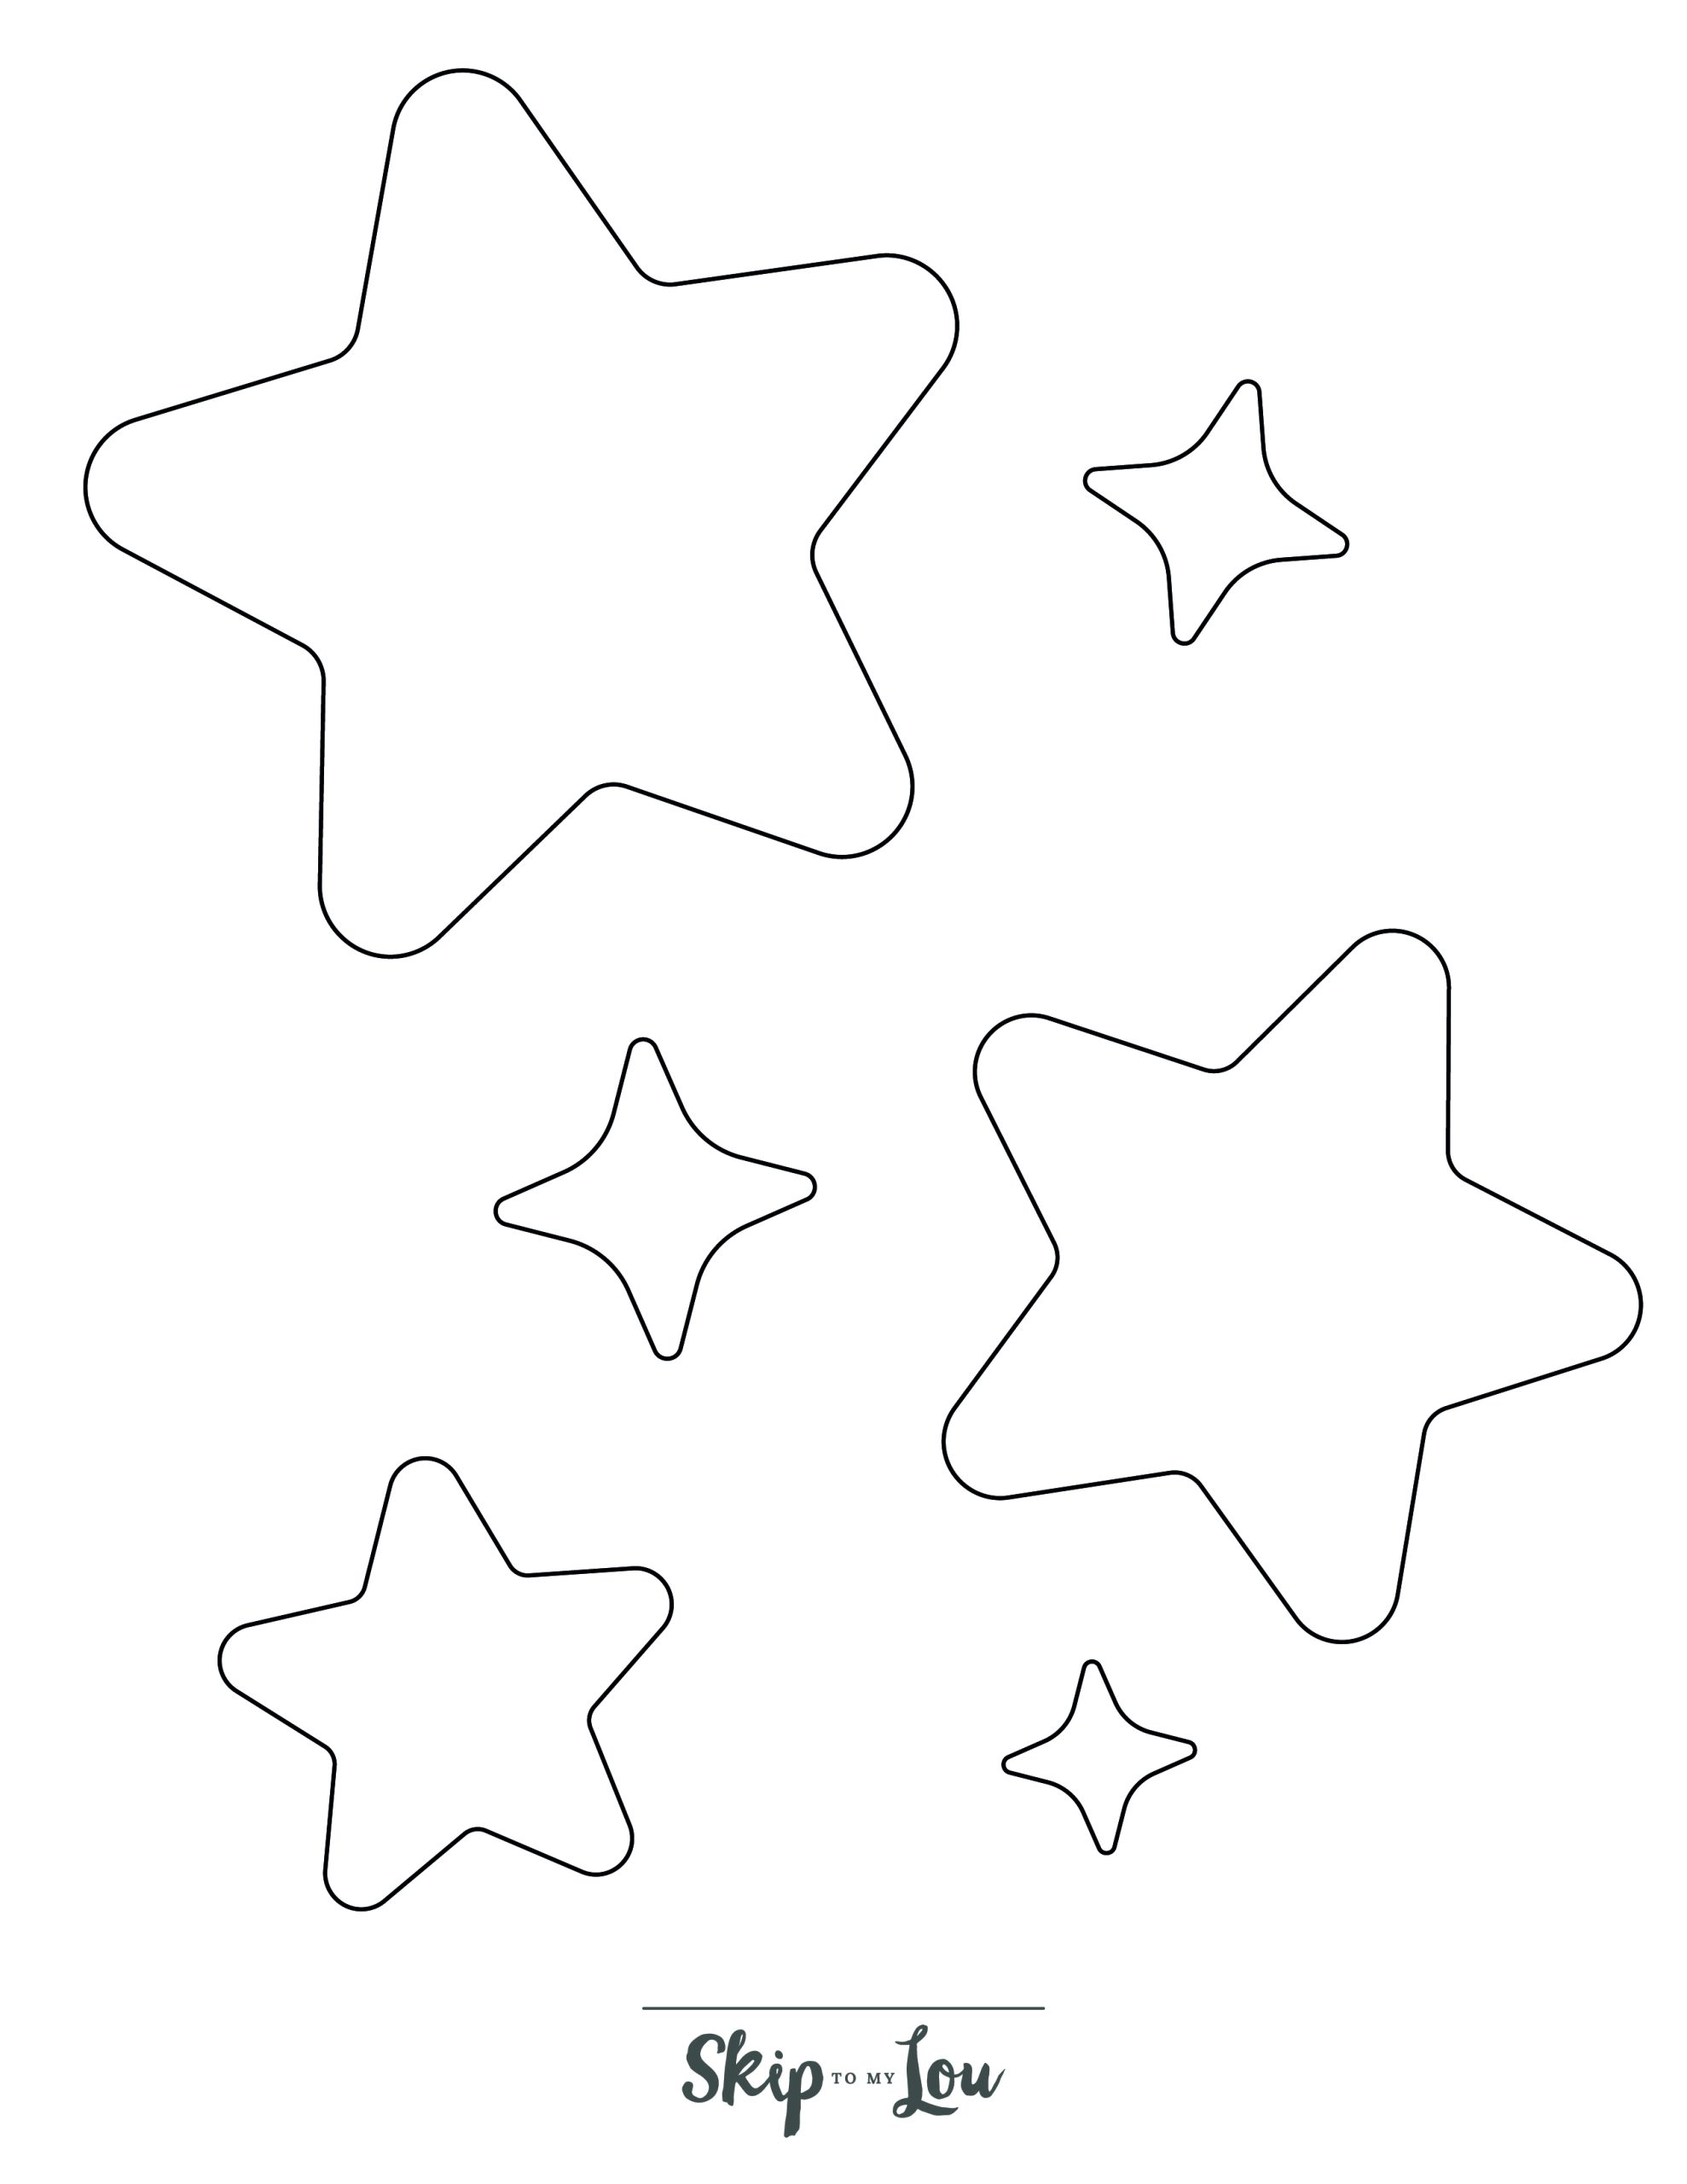 Star Coloring Page 7 - Line drawing of a many stars, large and small